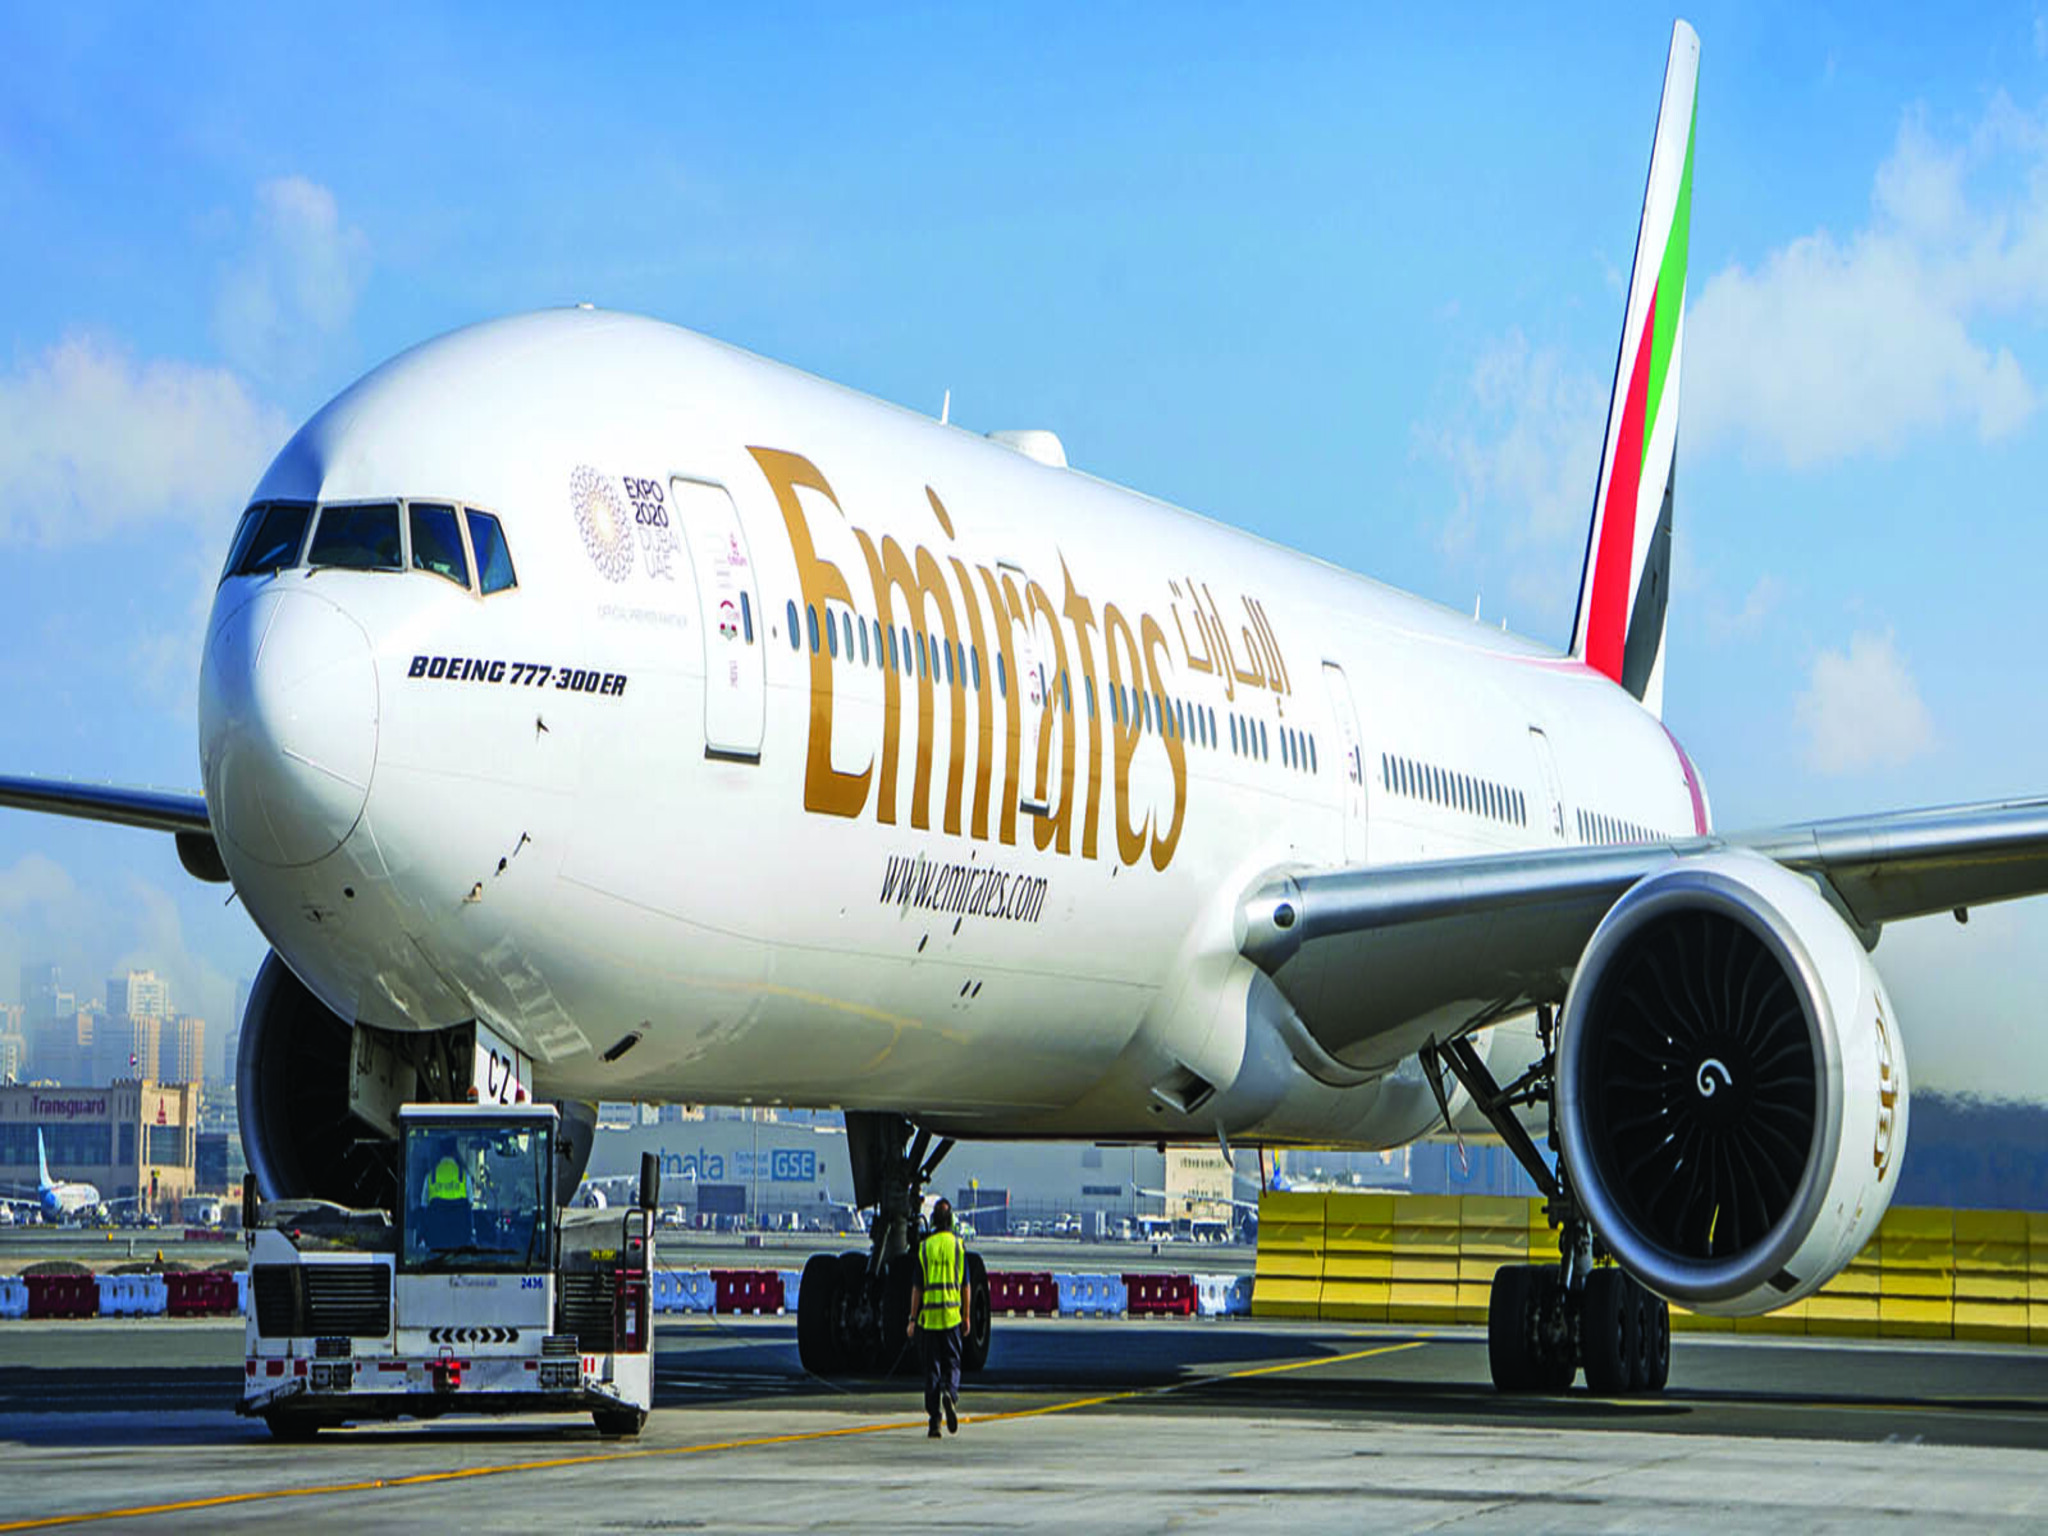 Emirates Airlines announces the suspension of travel completion for all customers through Dubai airport